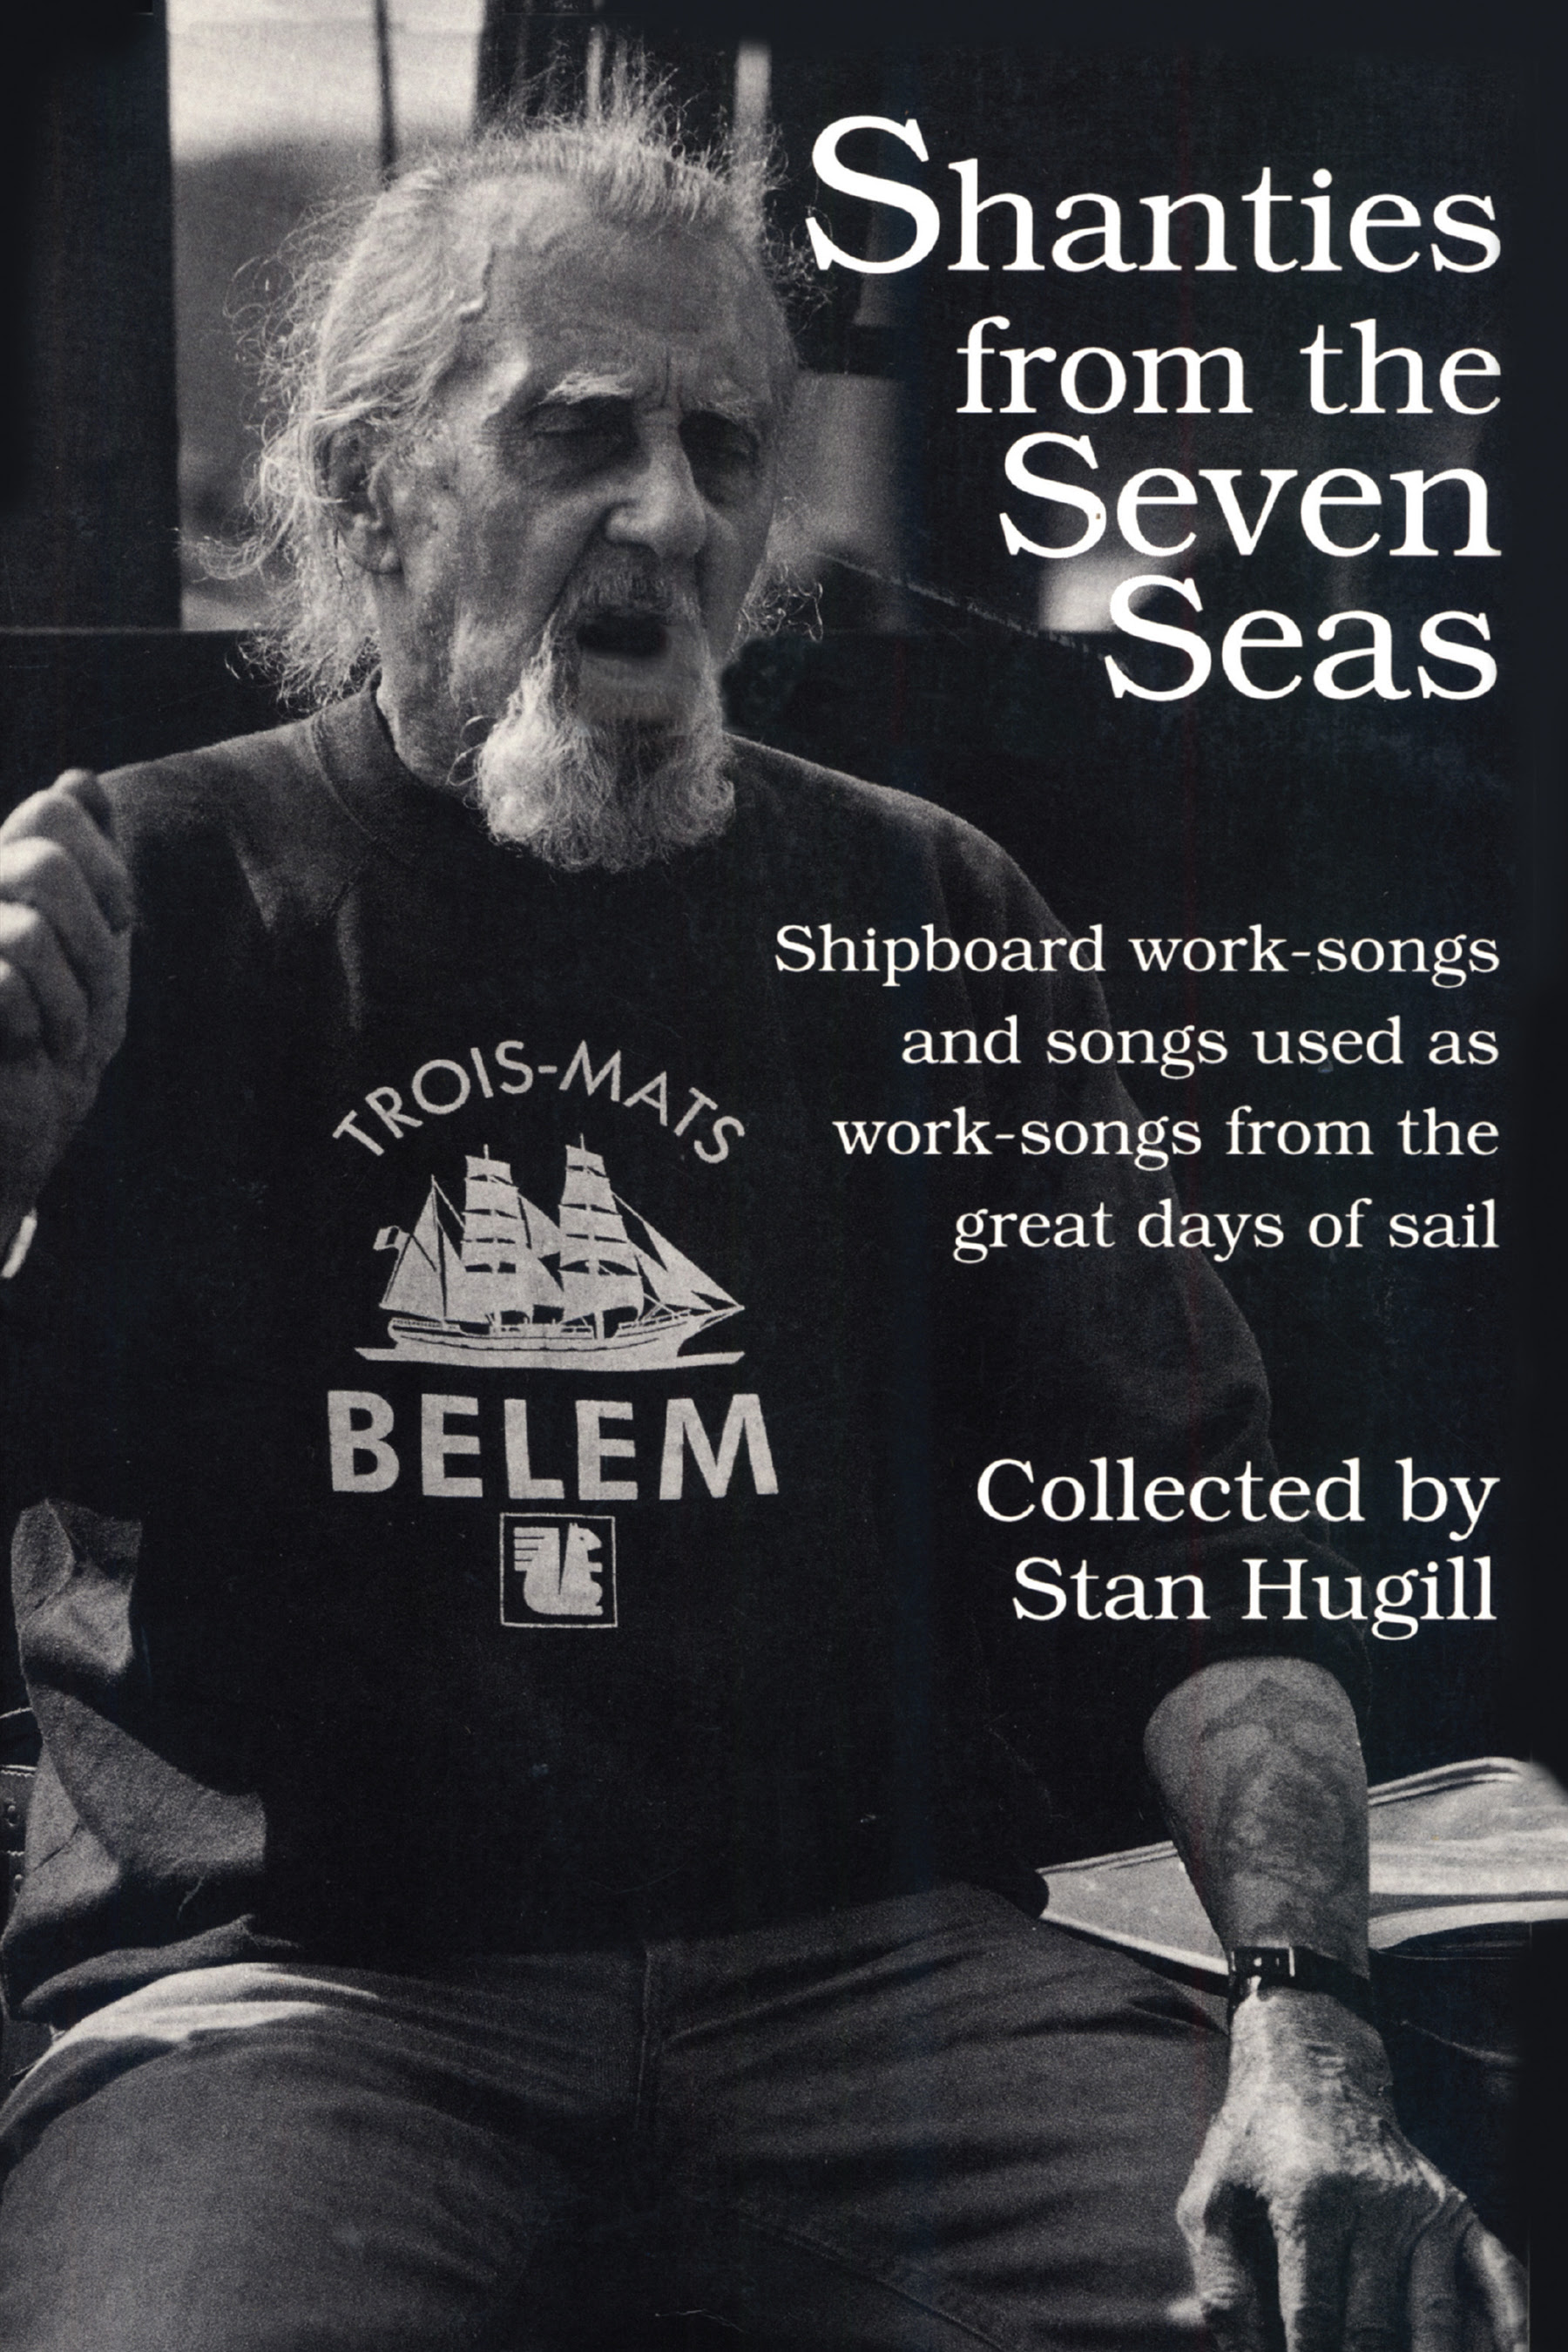 Cover of book Shanties from the Seven Seas, collected by Stan Hugill